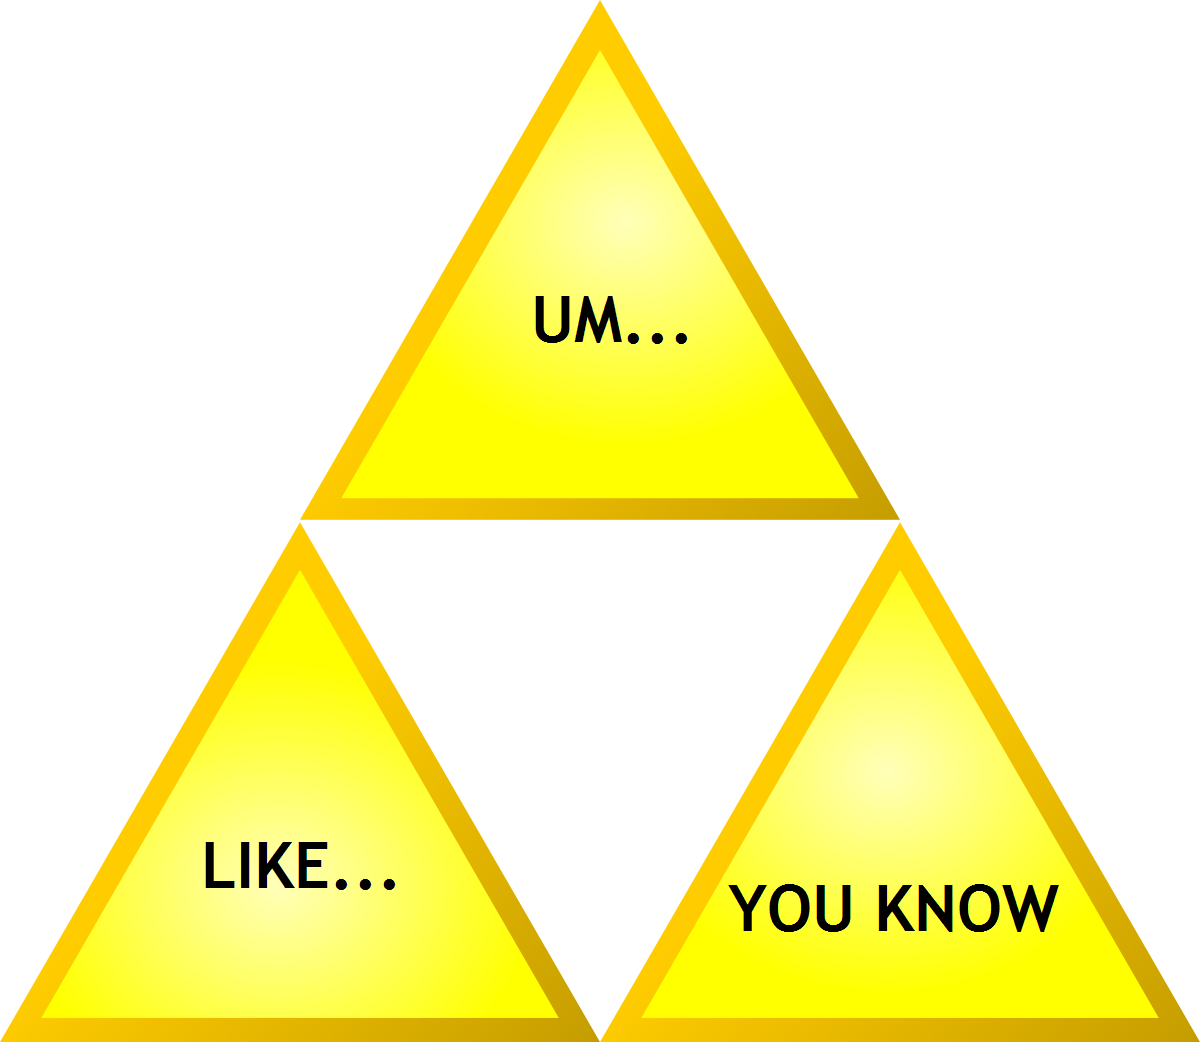 The annoying Triforce of speaking to an American [OC]